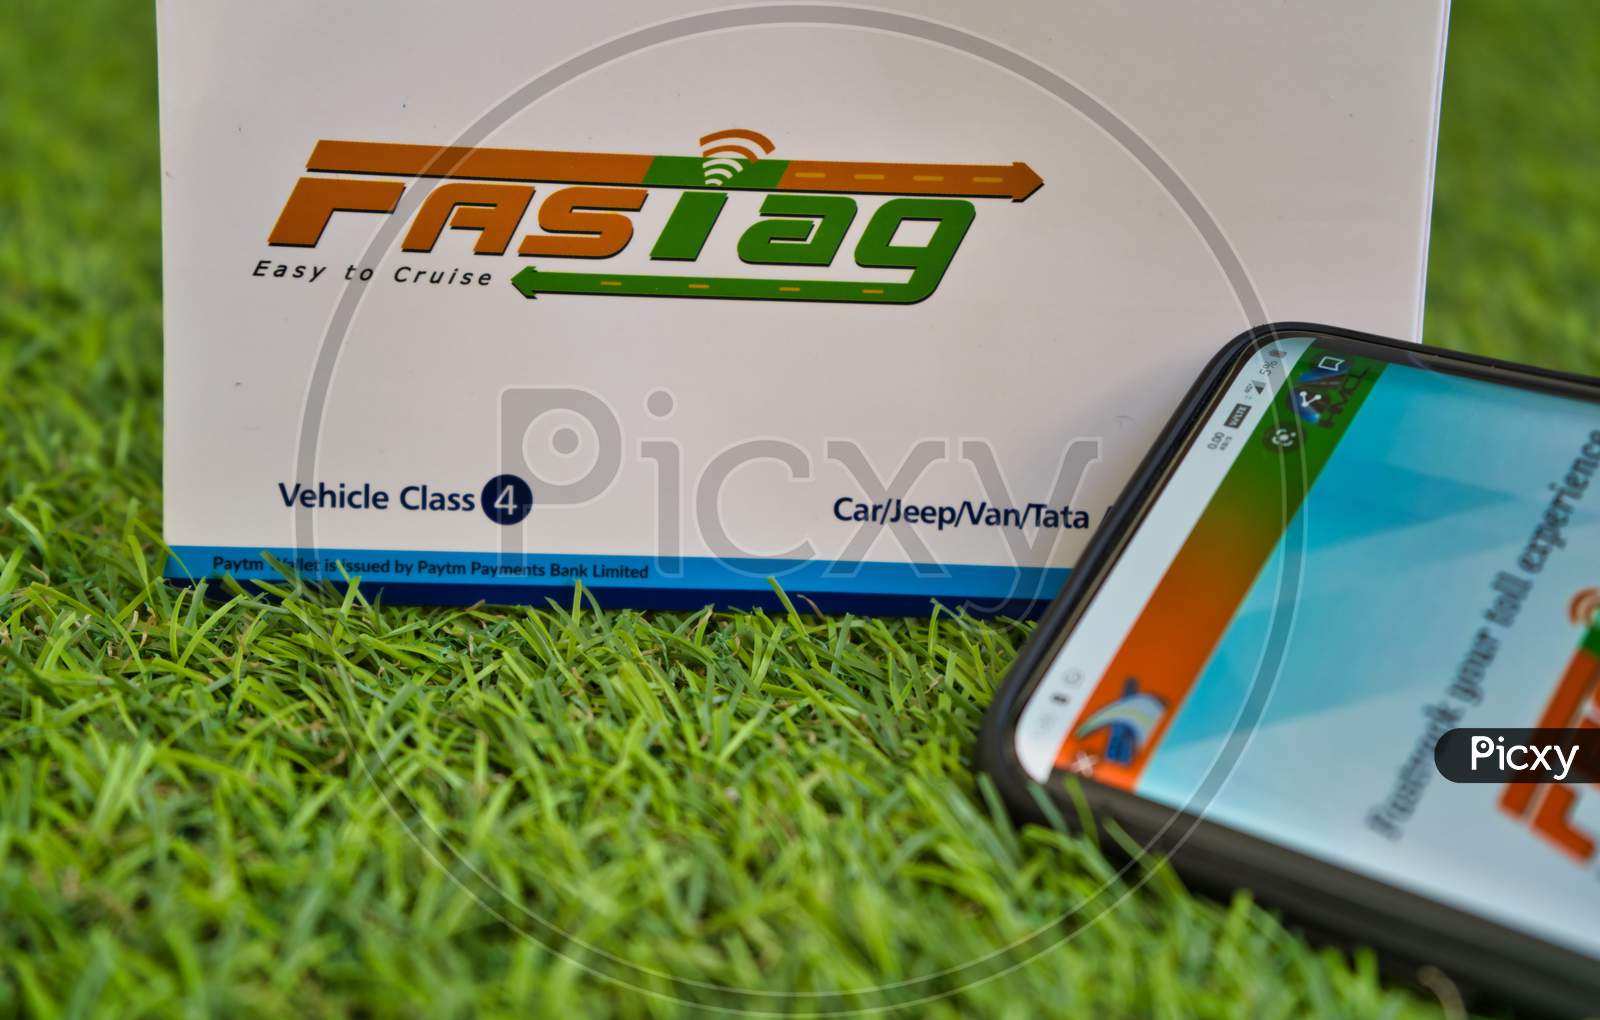 Fast Tag On Green Grass With A Mobile Phone Logged Into Fast Tag Website.